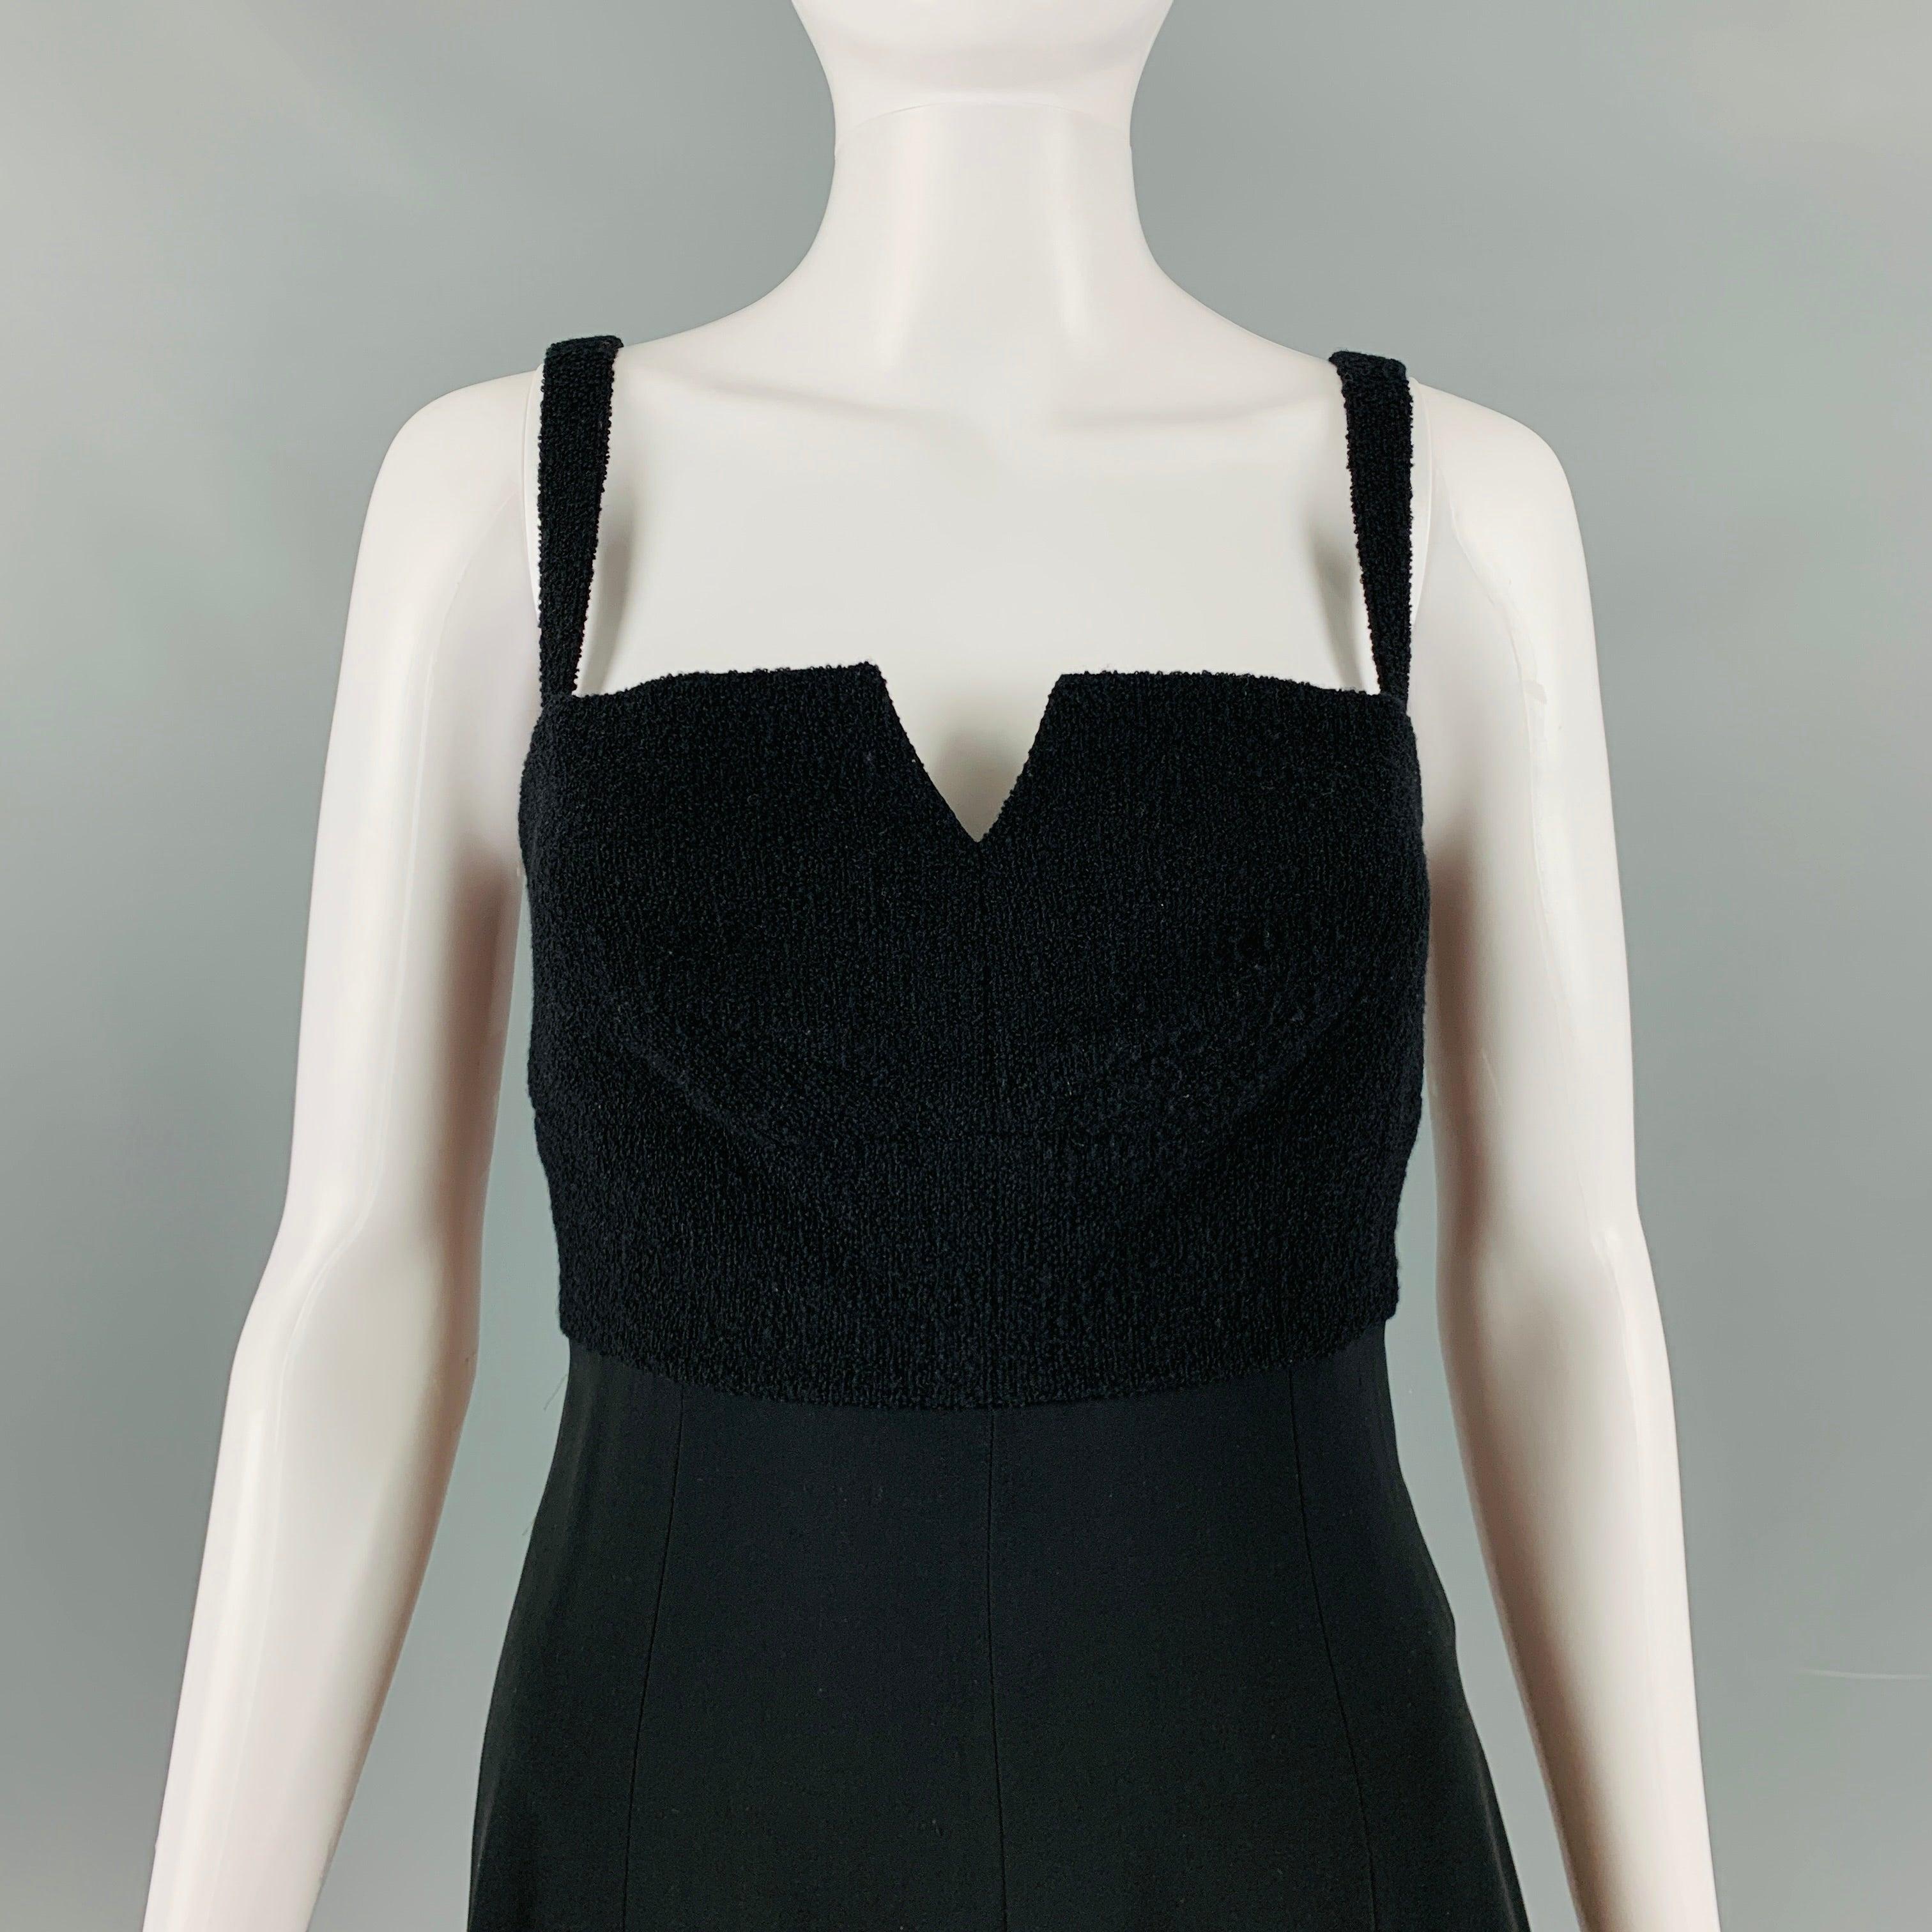 CHANEL 97 below knee dress comes in black black wool woven with a empire waist and a zip up closure at back. Made in France.Excellent Pre- Owned Conditions. 

Marked:   6 

Measurements: 
  Bust: 32 inches Waist: 26 inches Hip: 37 inches Length: 37